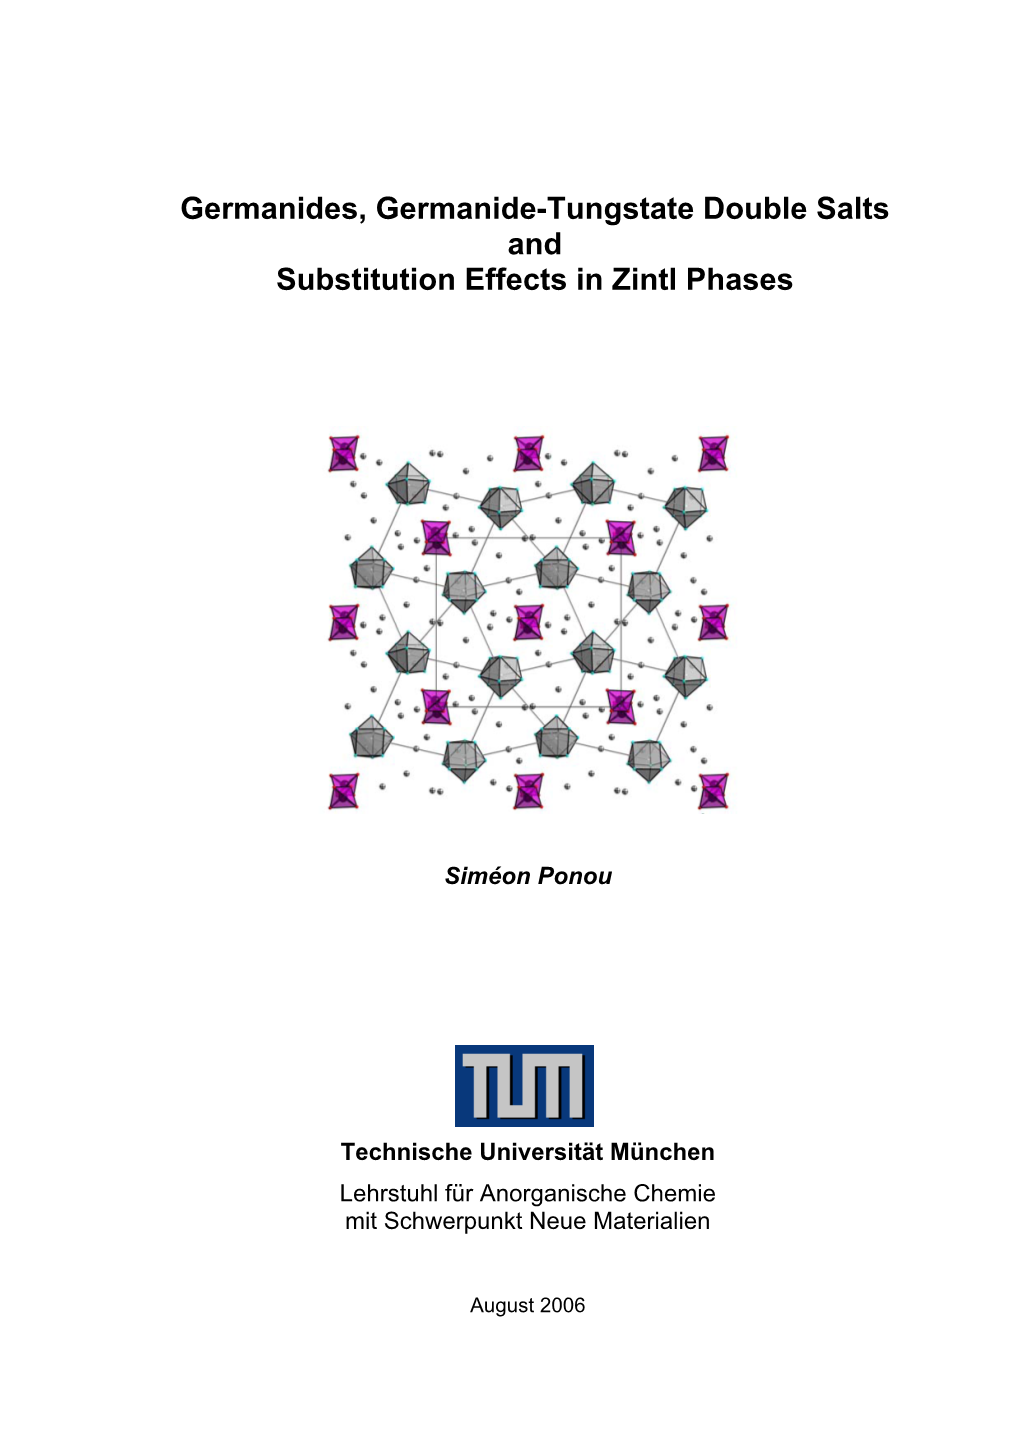 Germanides, Germanide-Tungstate Double Salts and Substitution Effects in Zintl Phases